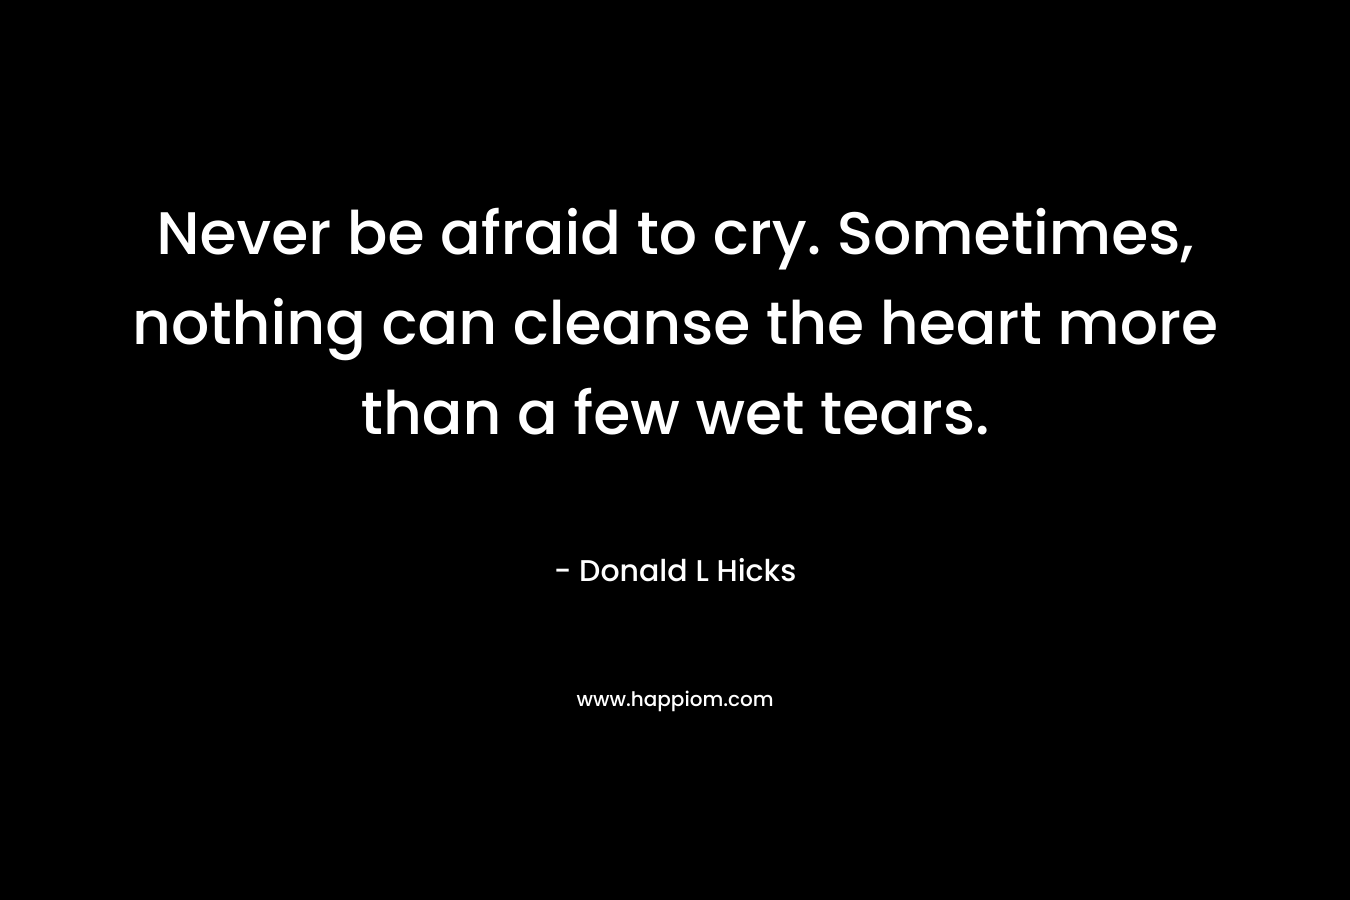 Never be afraid to cry. Sometimes, nothing can cleanse the heart more than a few wet tears.